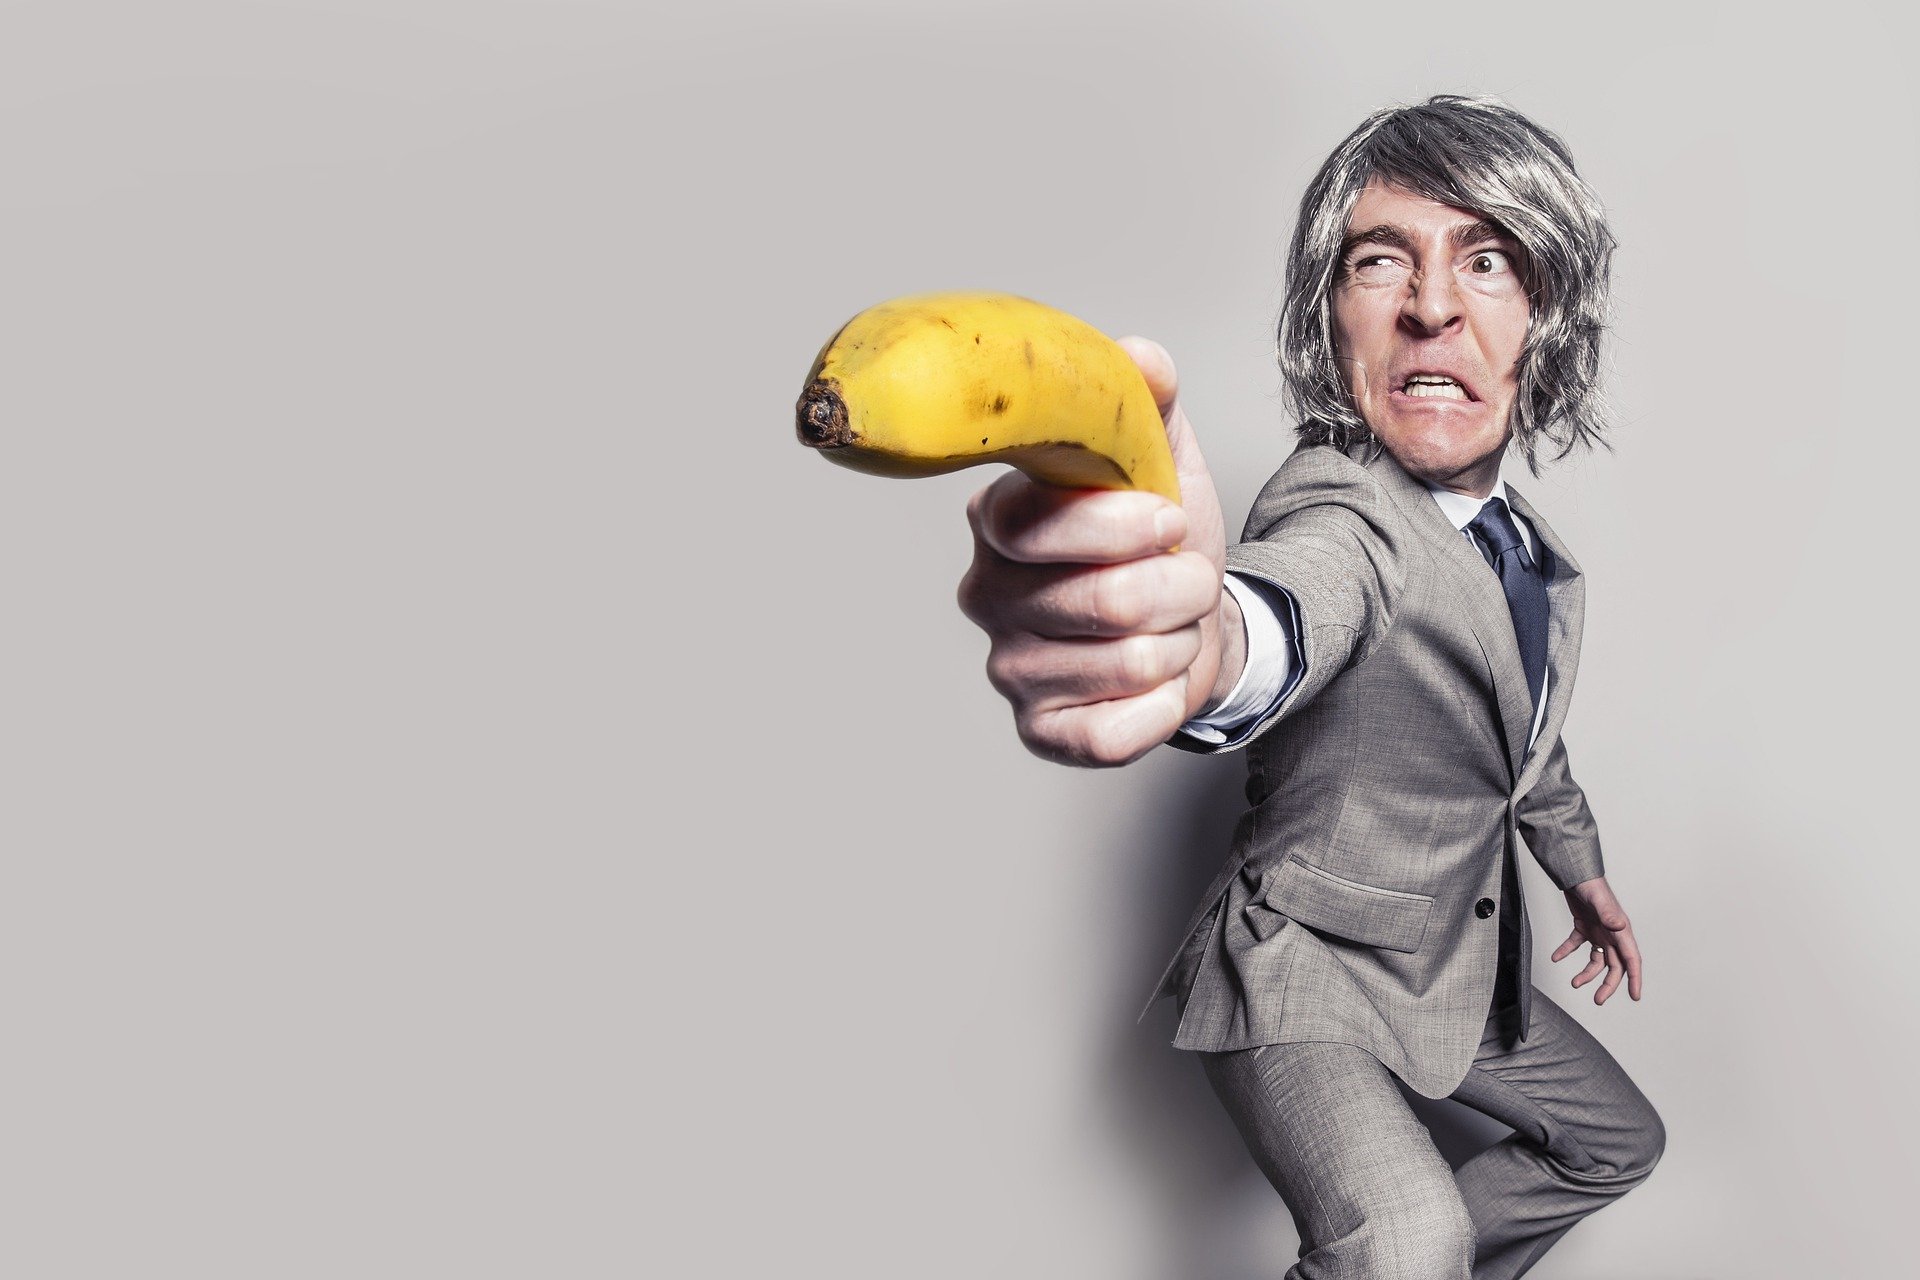 Man in suit holding banana